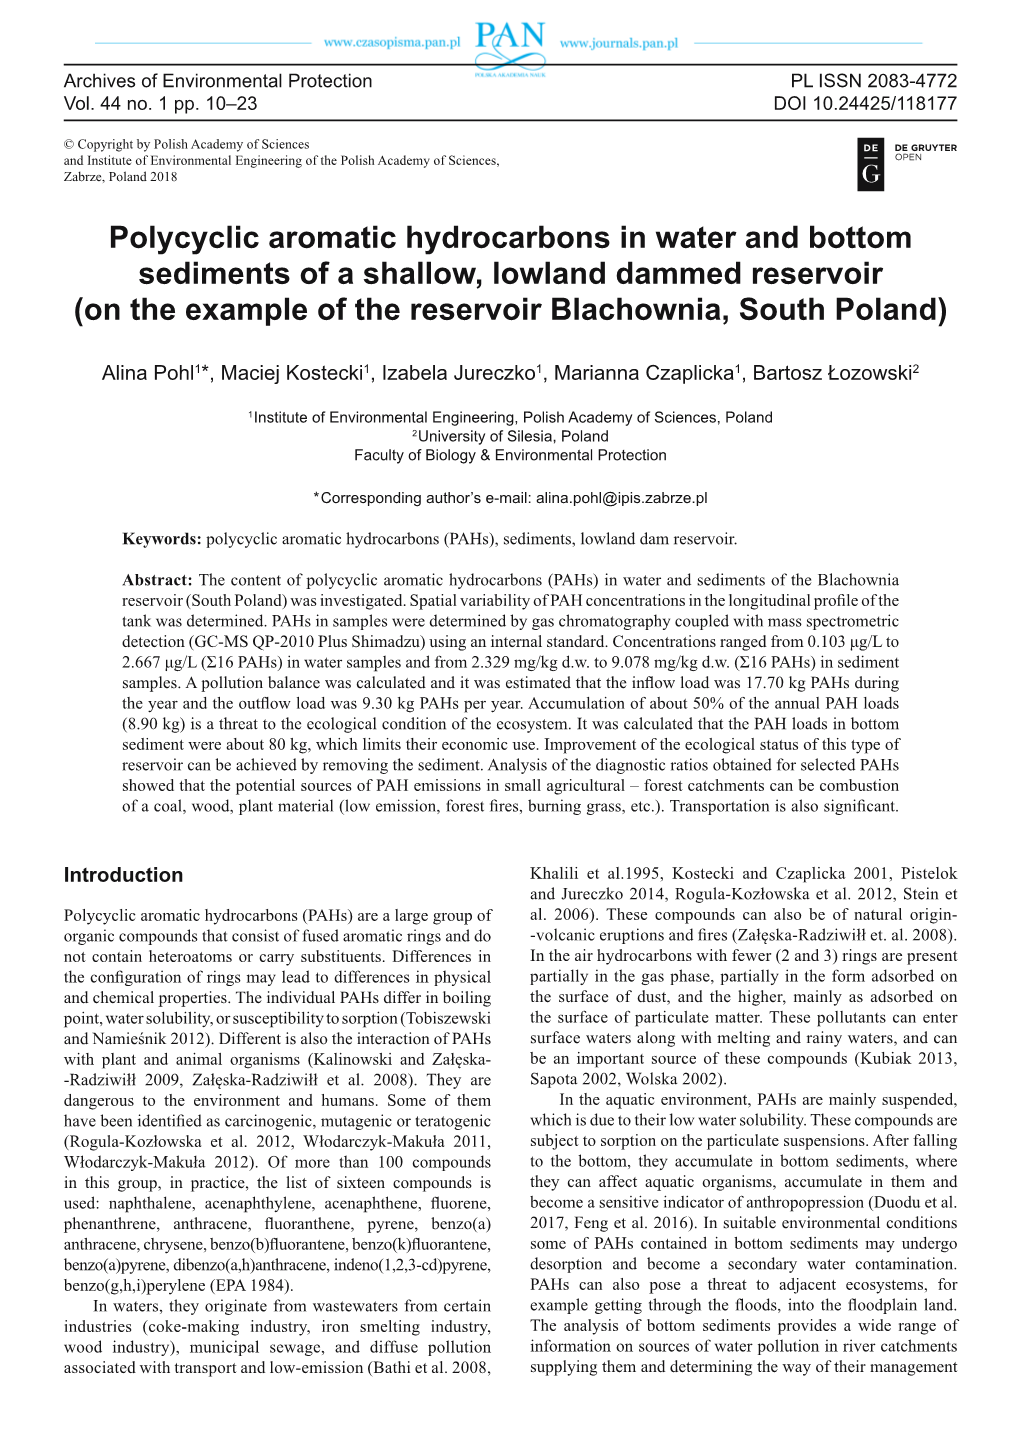 Polycyclic Aromatic Hydrocarbons in Water and Bottom Sediments of a Shallow, Lowland Dammed Reservoir (On the Example of the Reservoir Blachownia, South Poland)